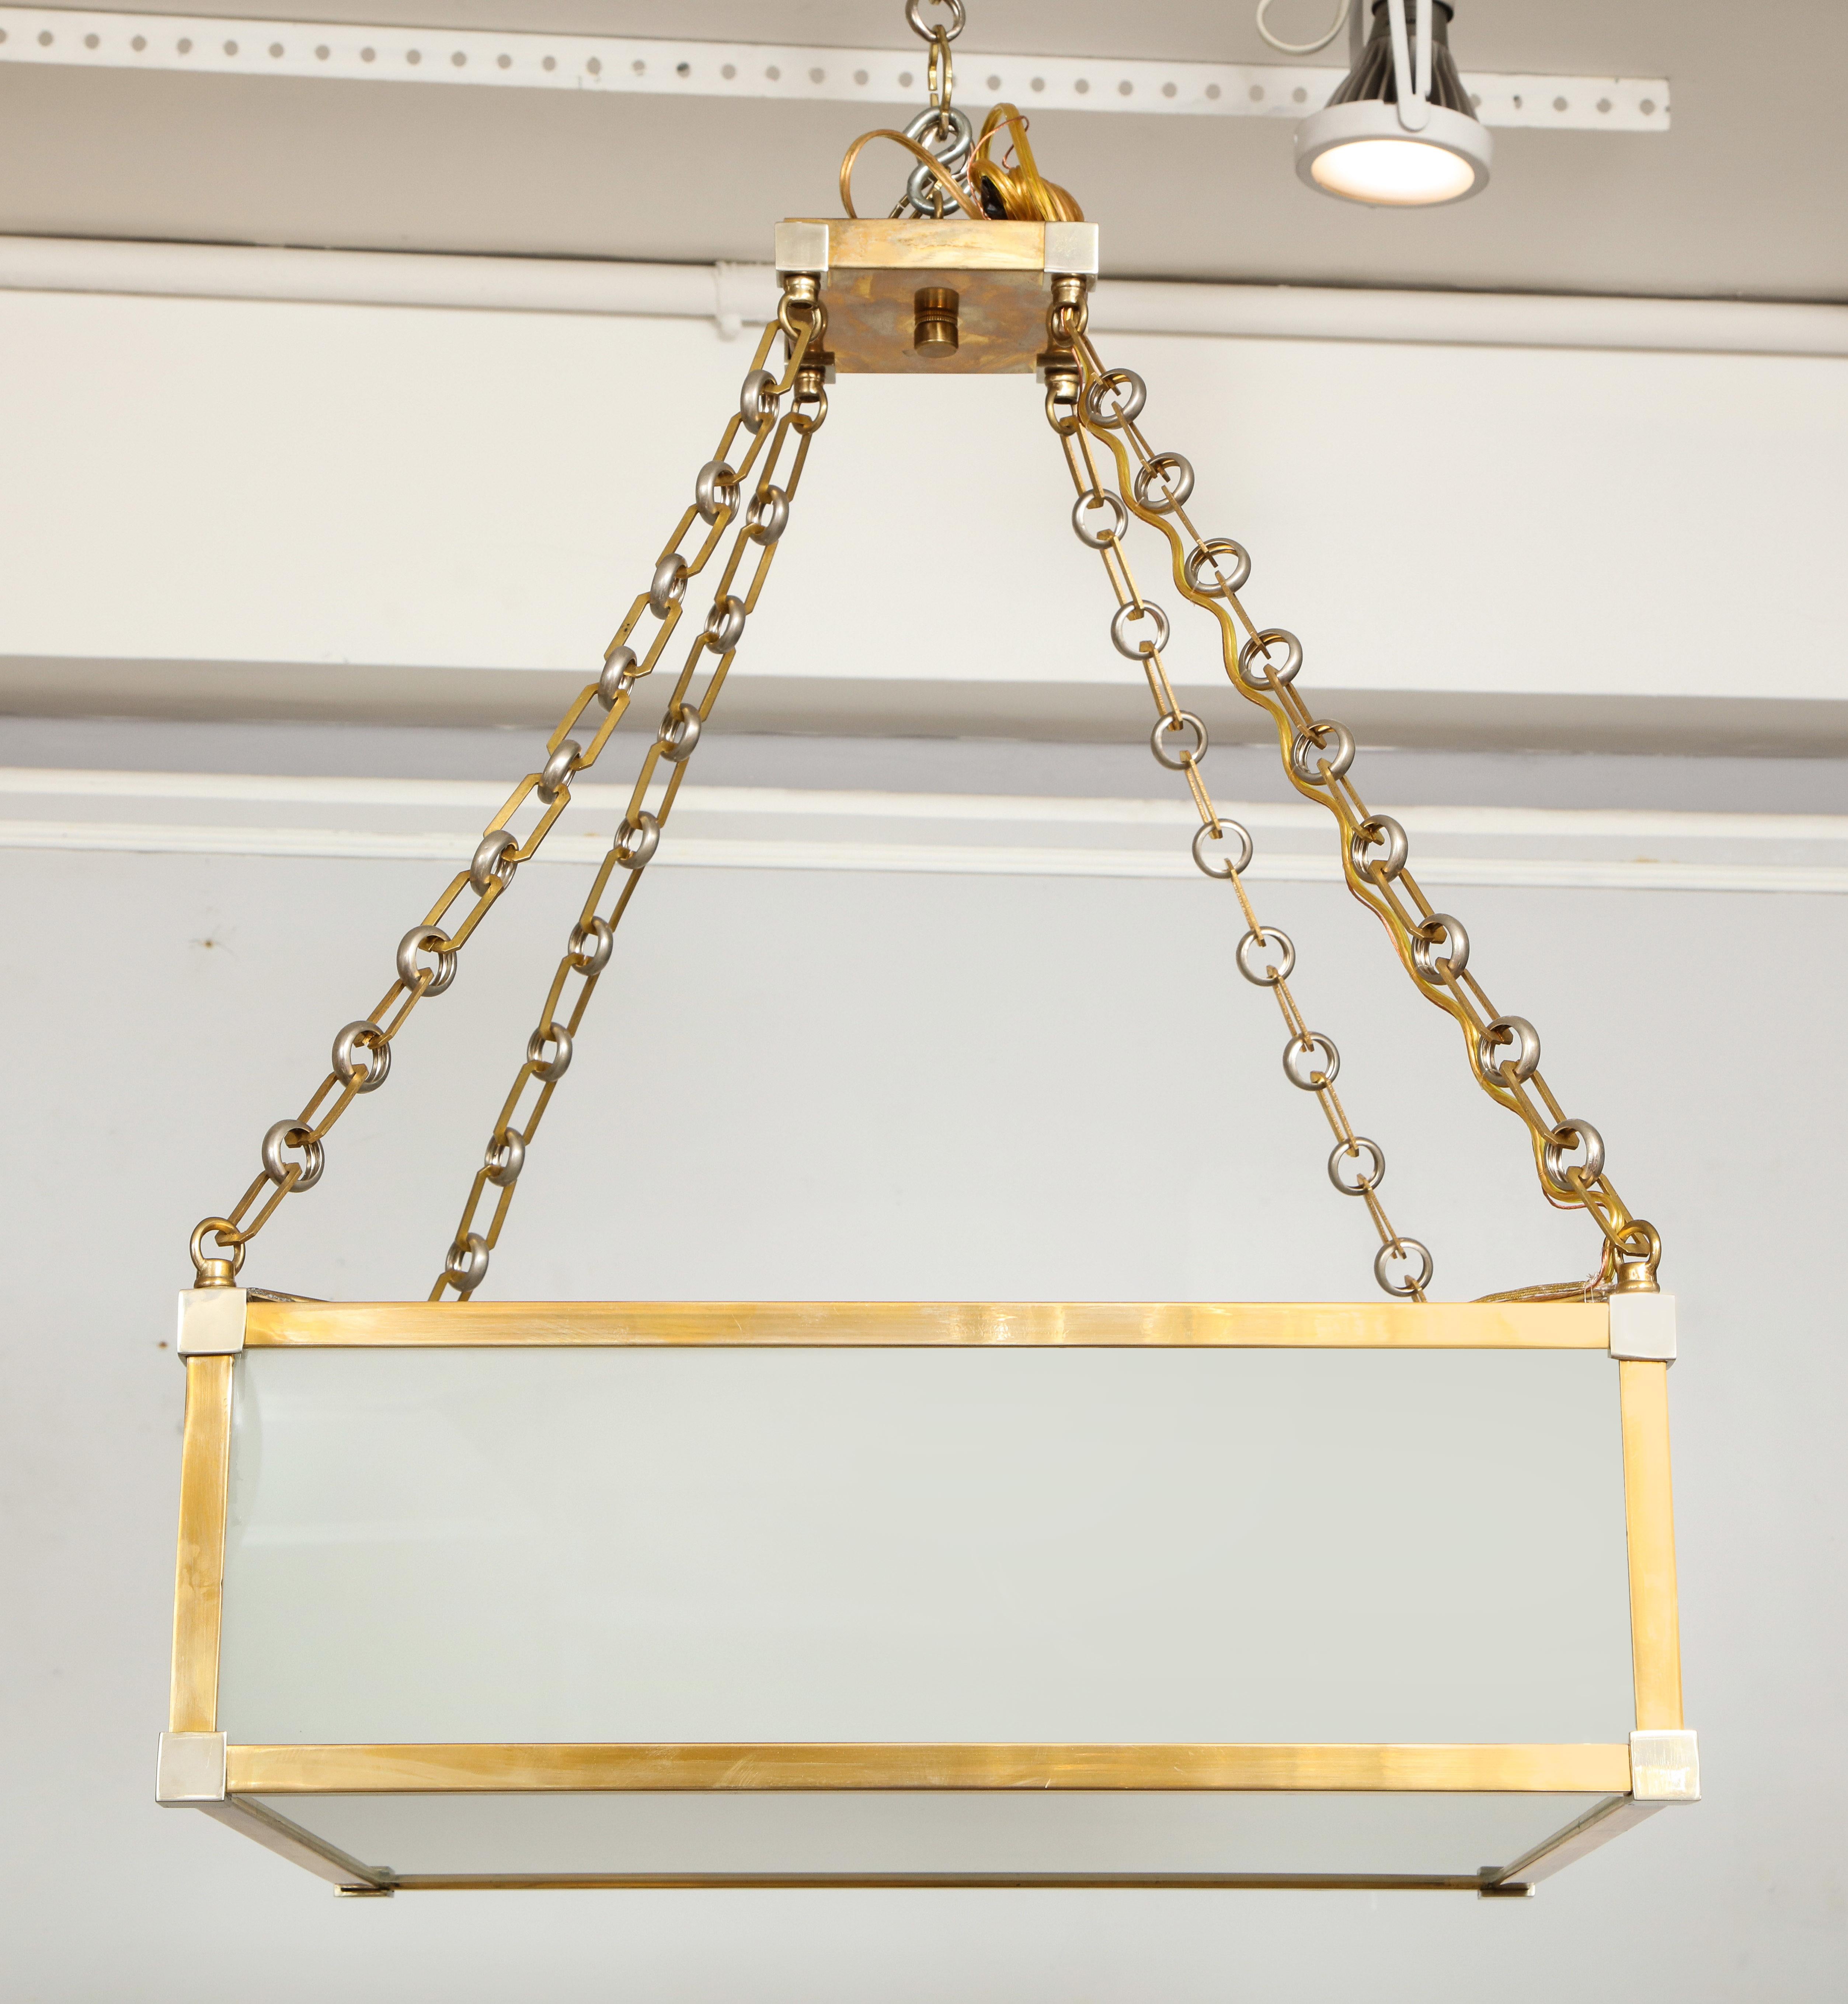 American Custom Art Deco Style Nickel and Brass-Plated Pendant Fixture For Sale